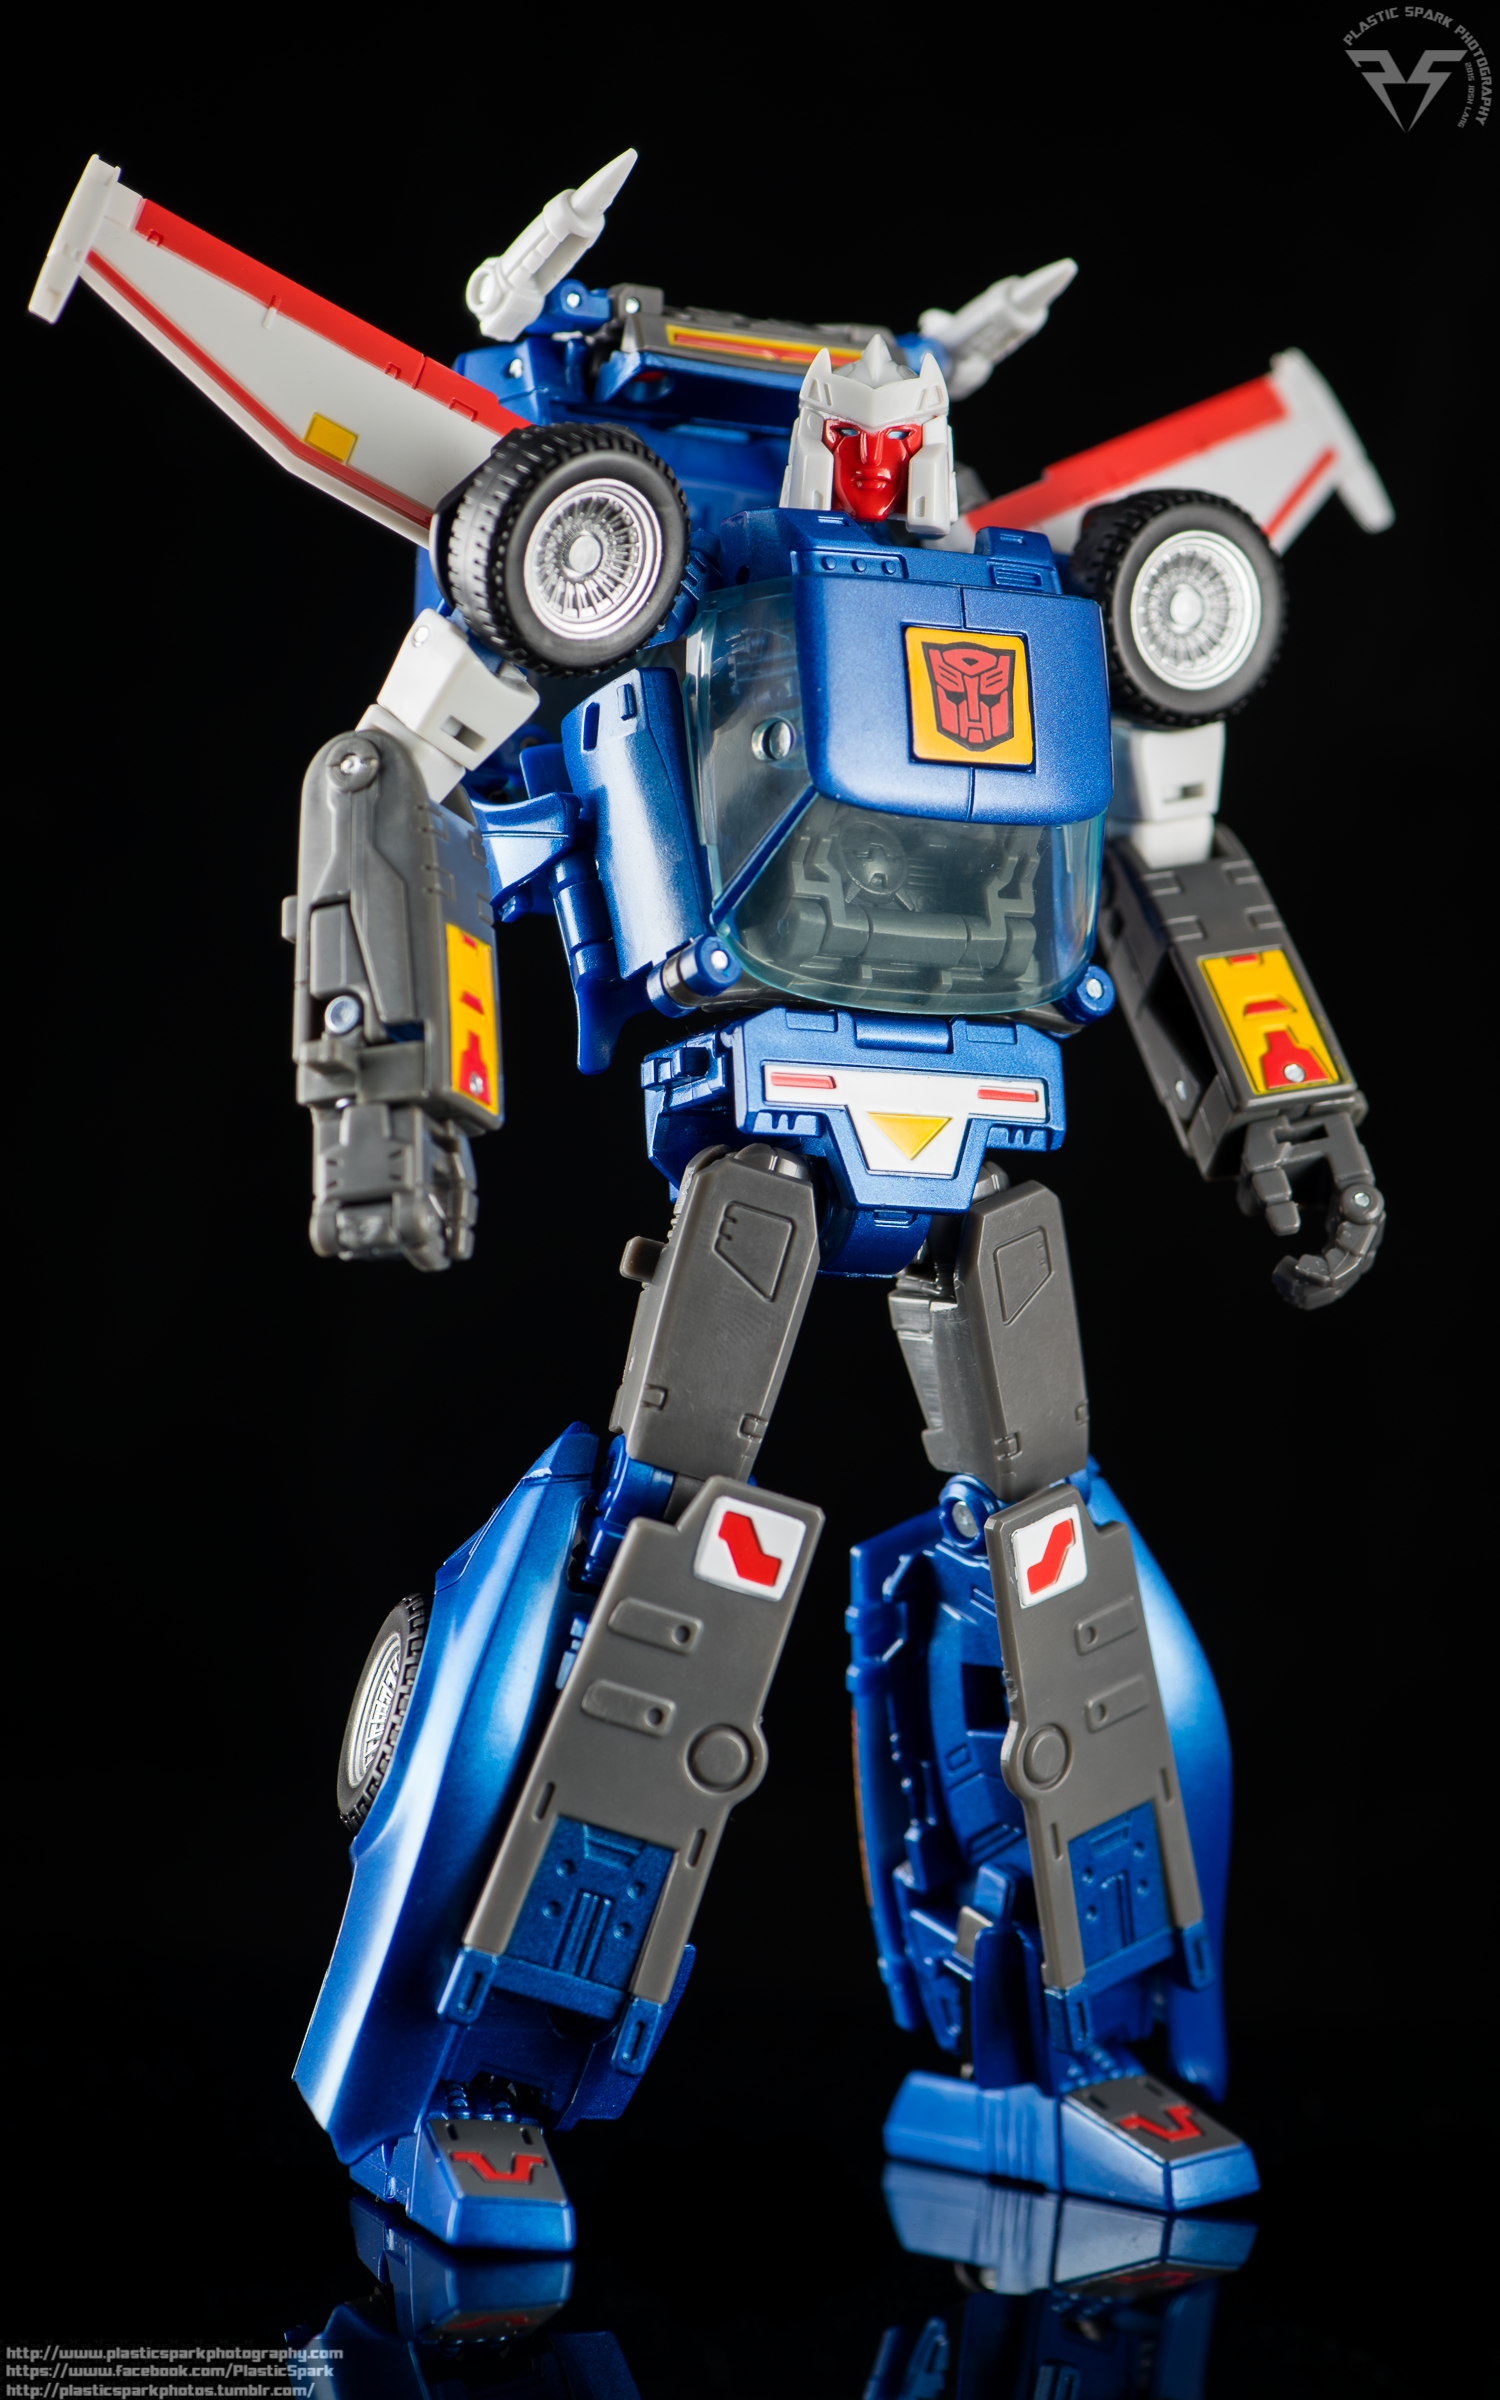 Review - MP25 Masterpiece Tracks — Plastic Spark Photography